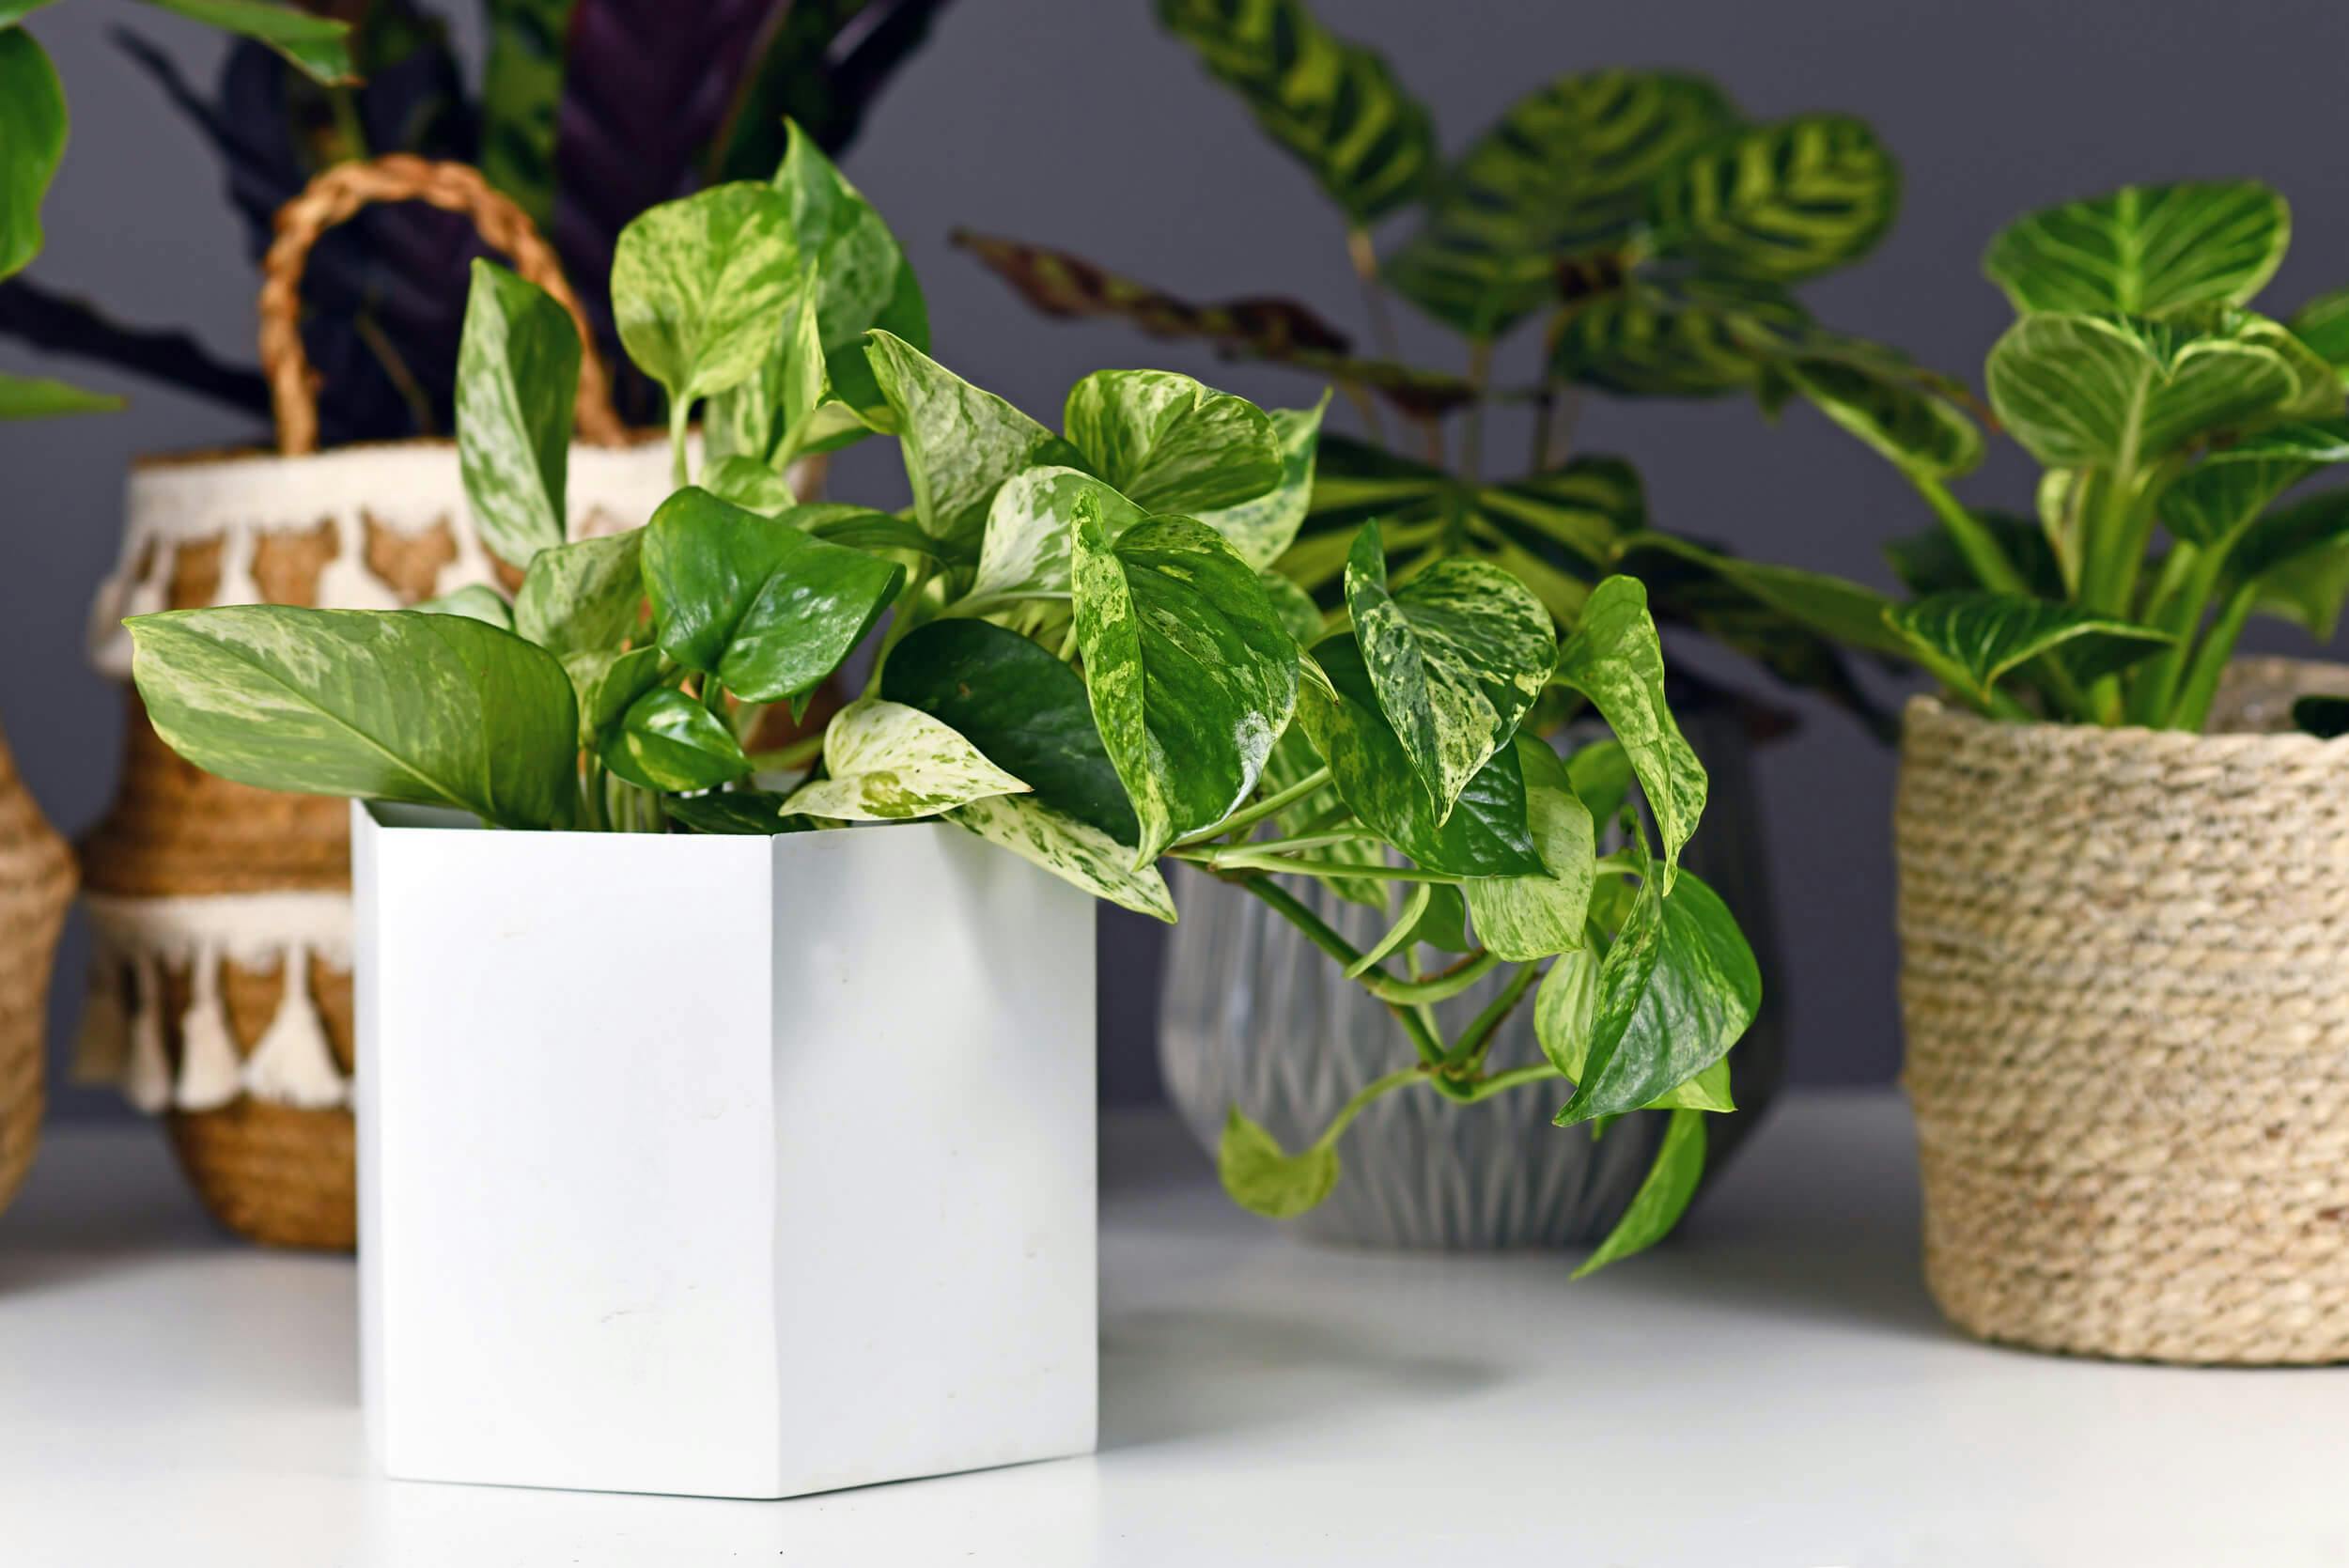 Marble Queen Pothos in a white hexagonal pot amongst other houseplants